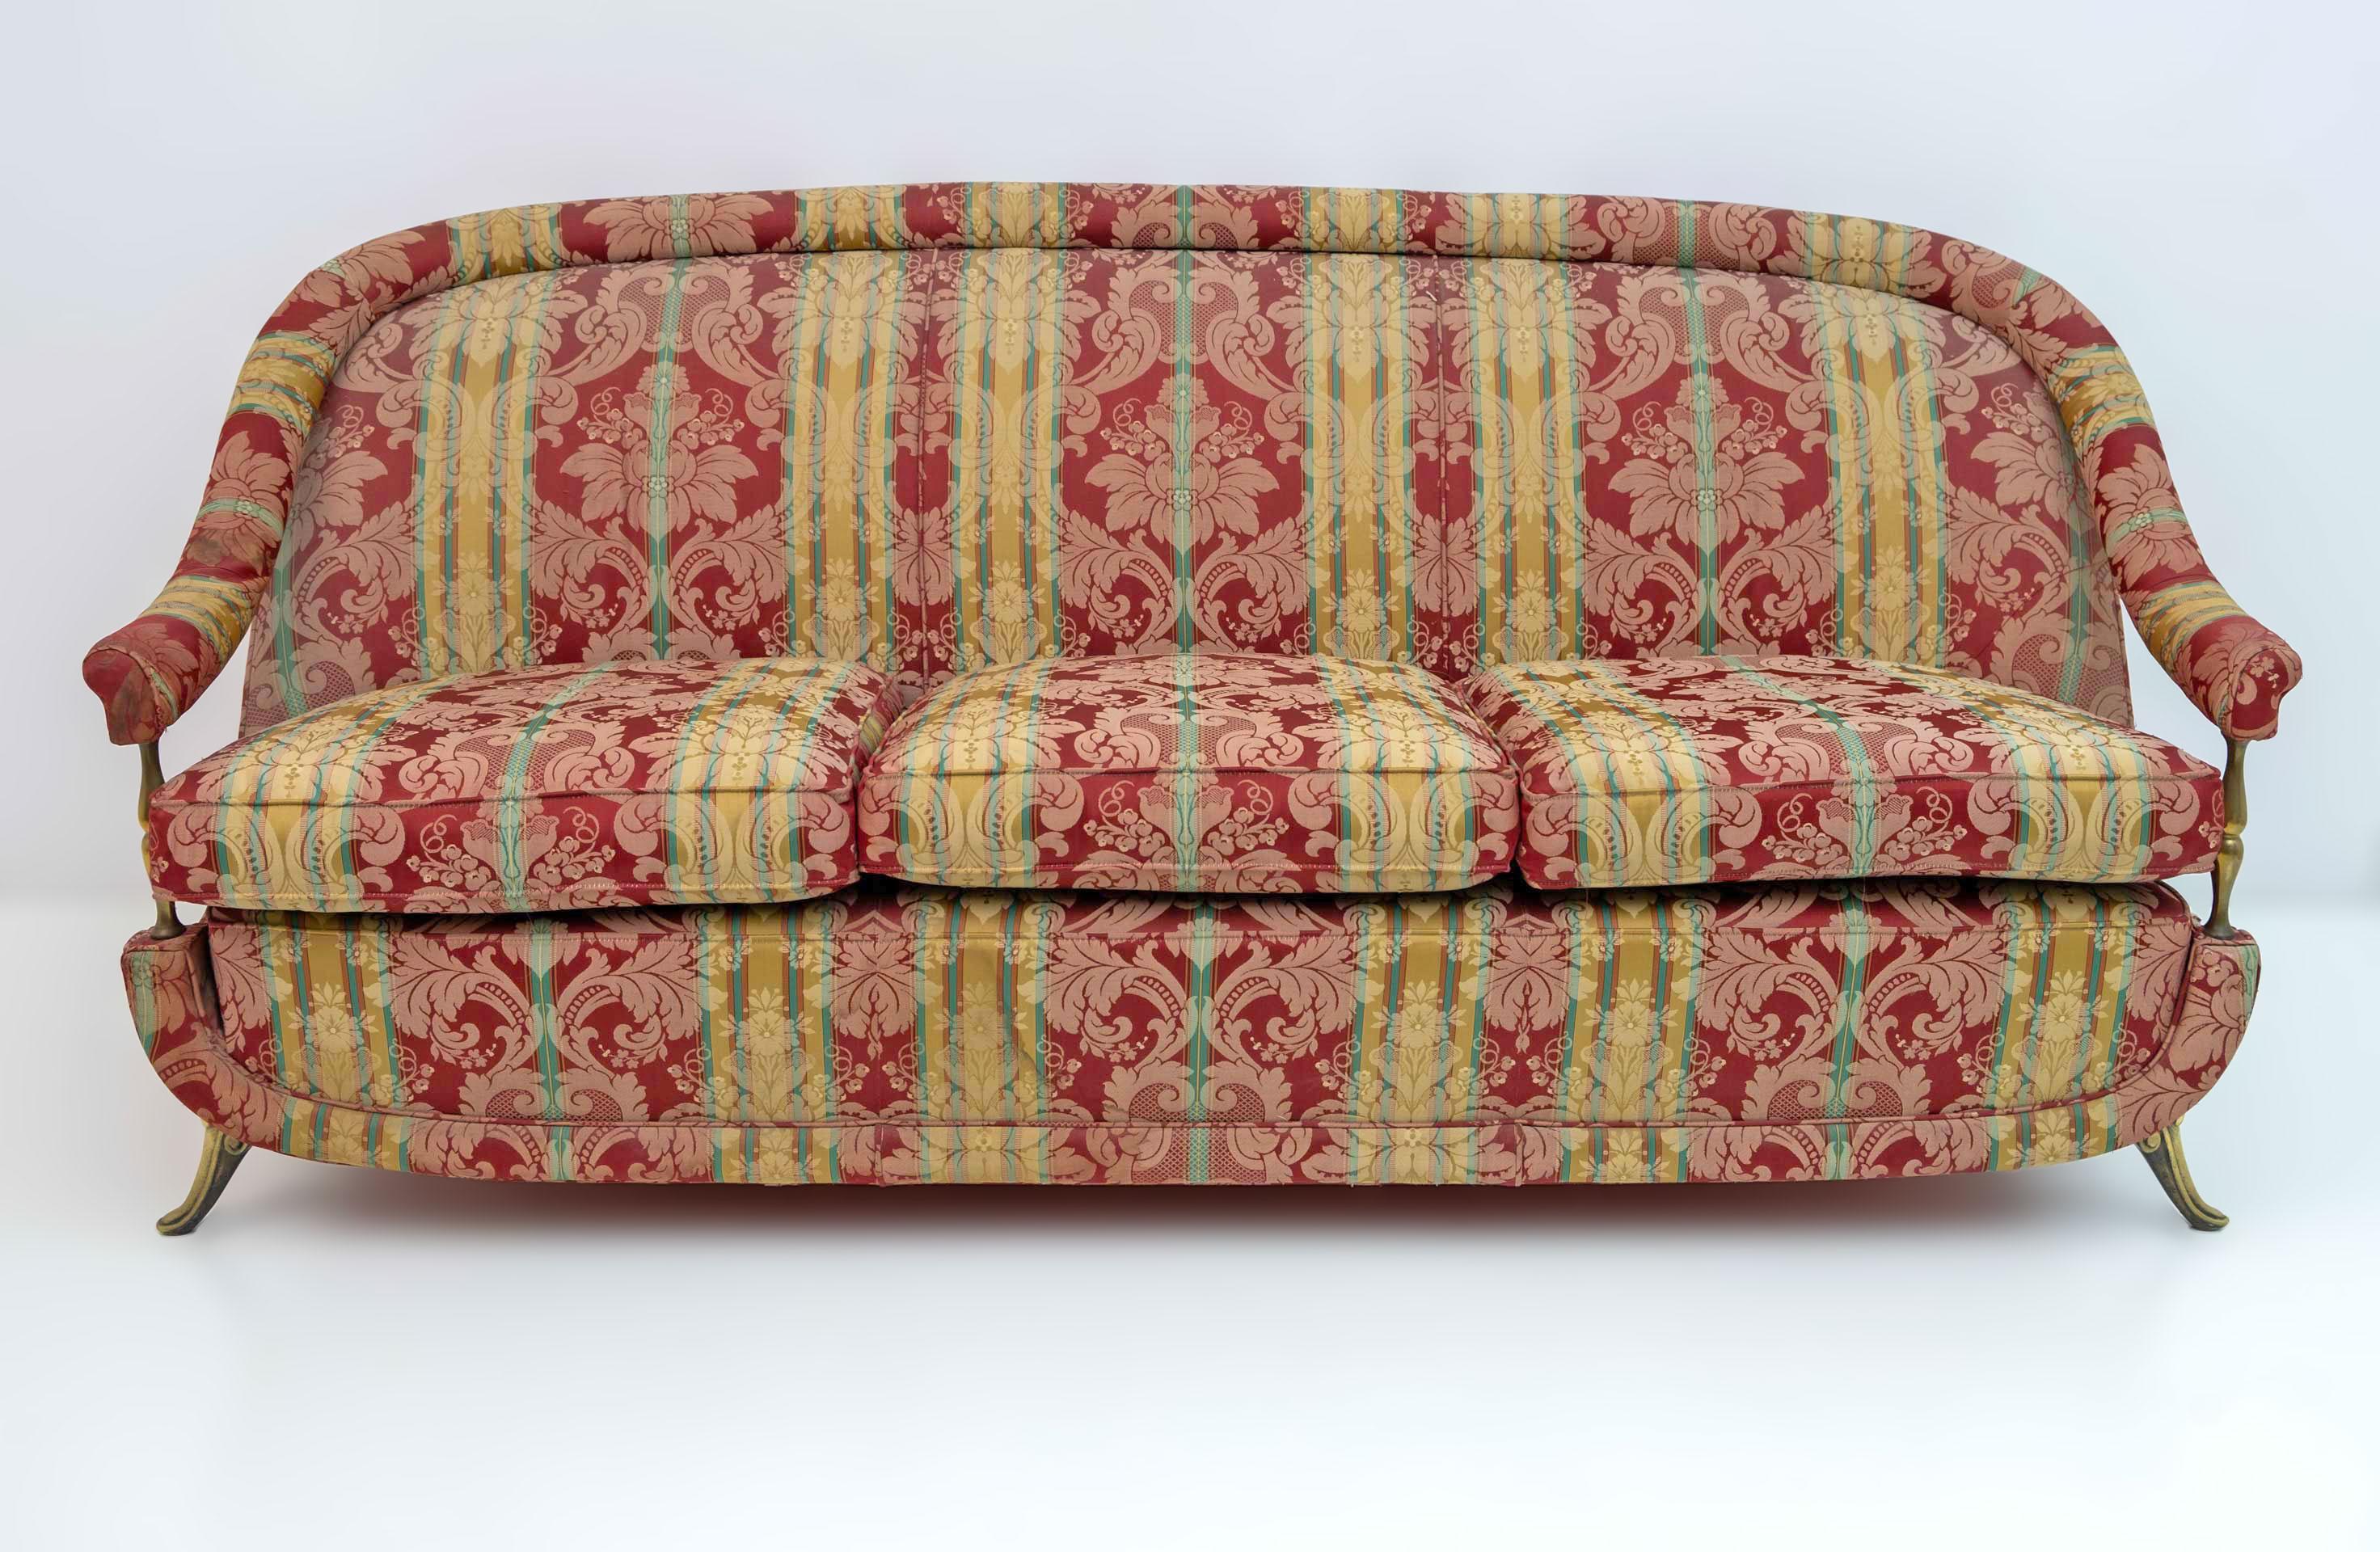 Three-seater sofa in Art Deco style, with feet and columns to support the armrests, in brass. The upholstery was redone twenty years ago but is worn and stained, new upholstery is recommended. French production from the 1950s.
